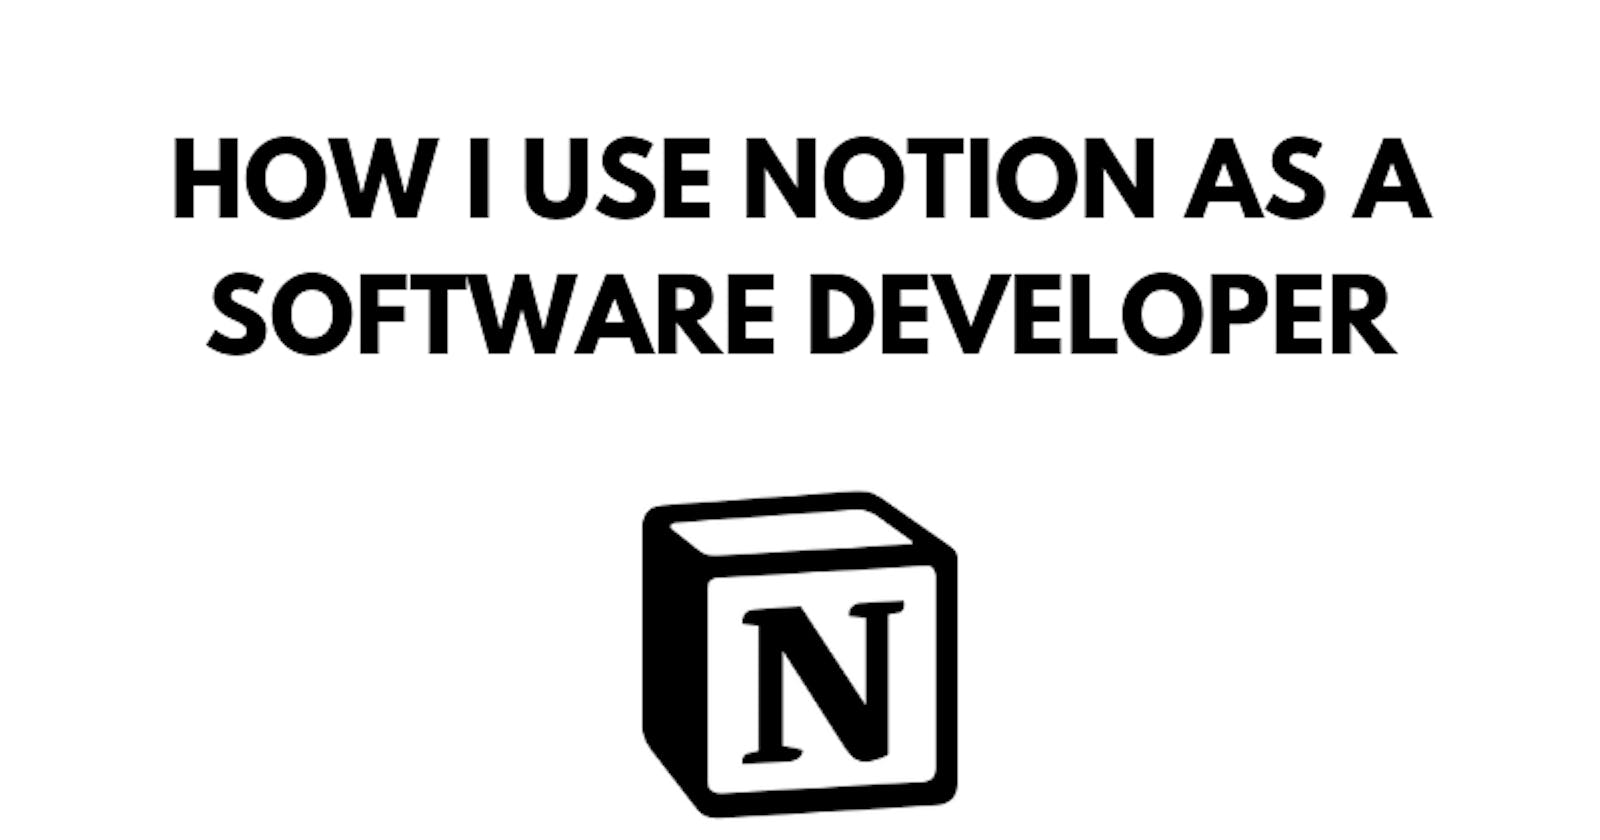 How I use Notion as a Software Developer